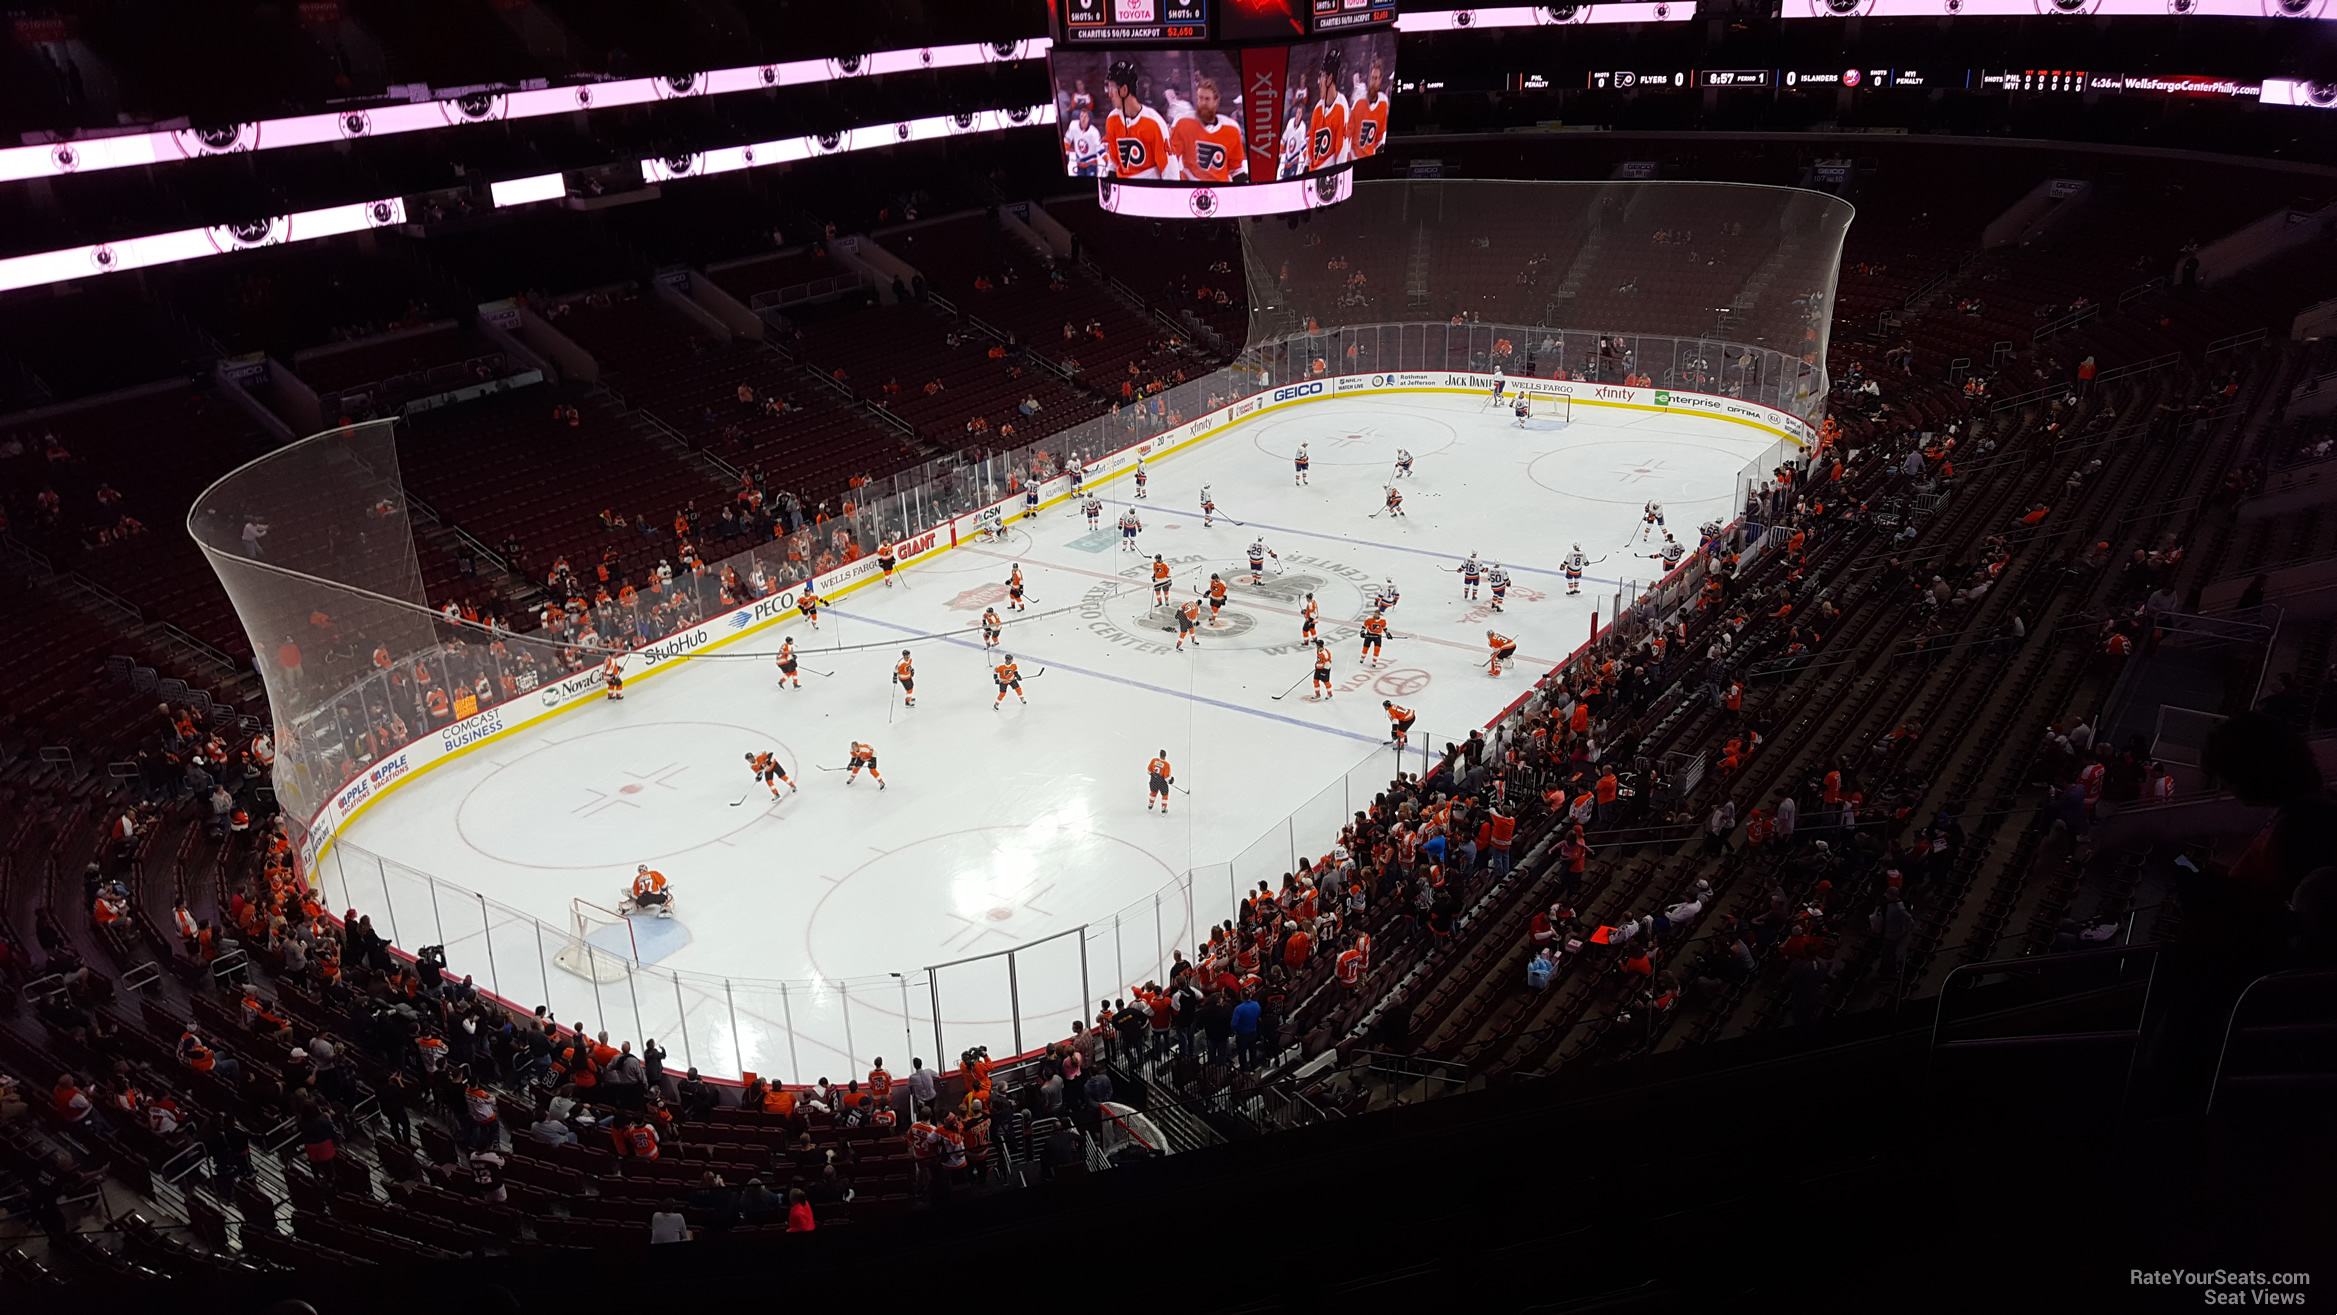 section 221a, row 8 seat view  for hockey - wells fargo center